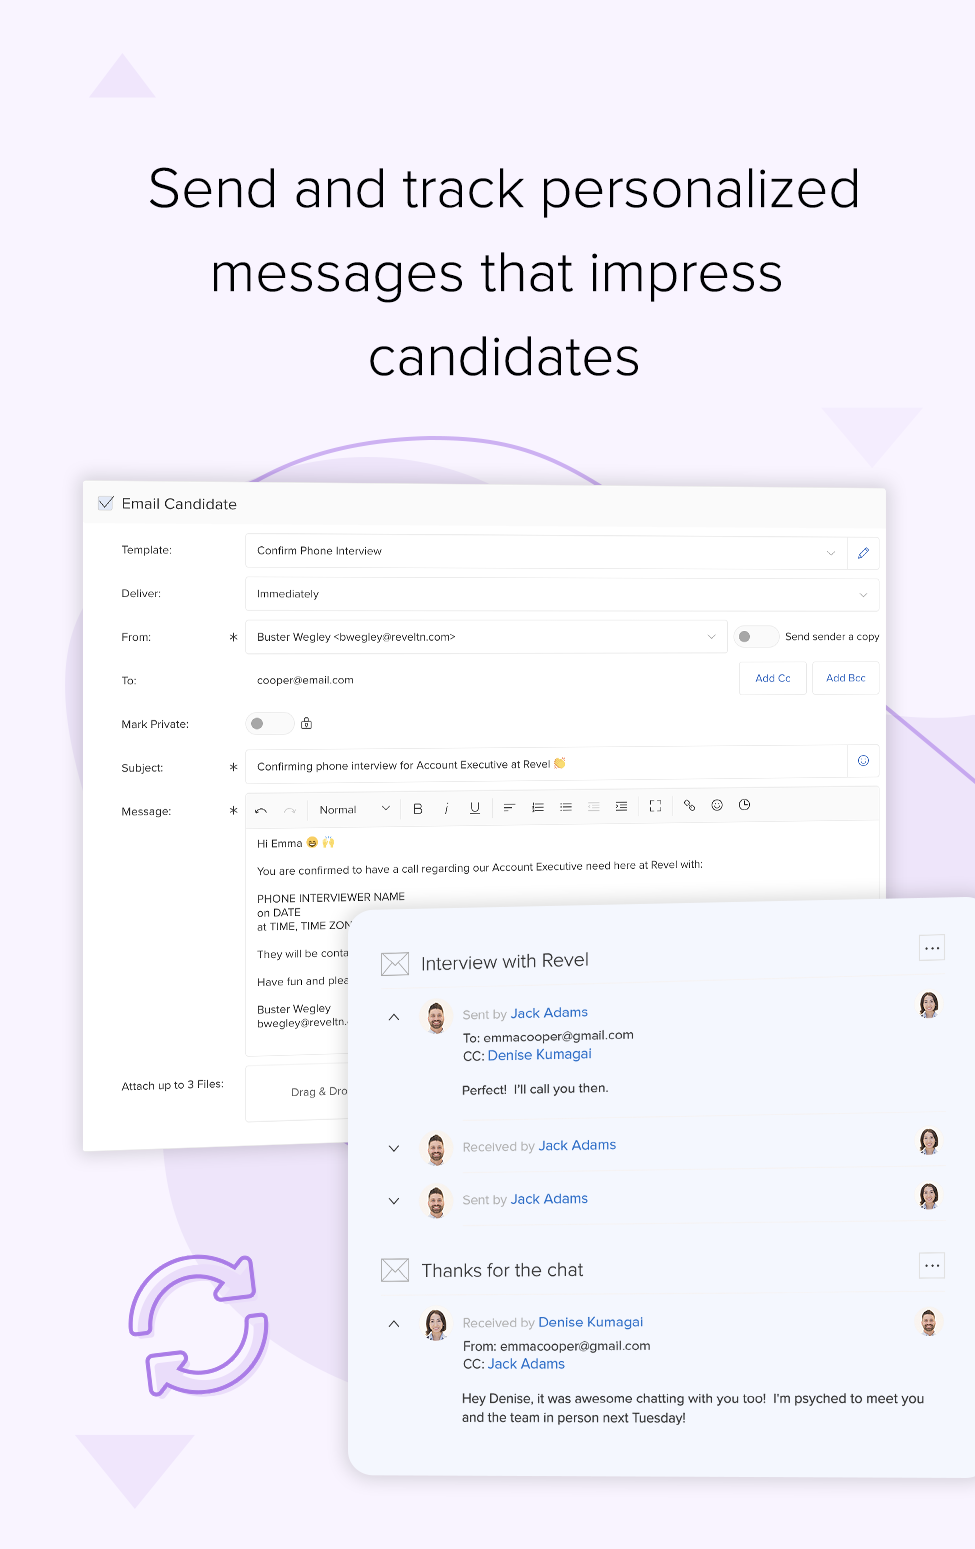 Send and track personalized messages that impress candidates | mobile recruiting software emails